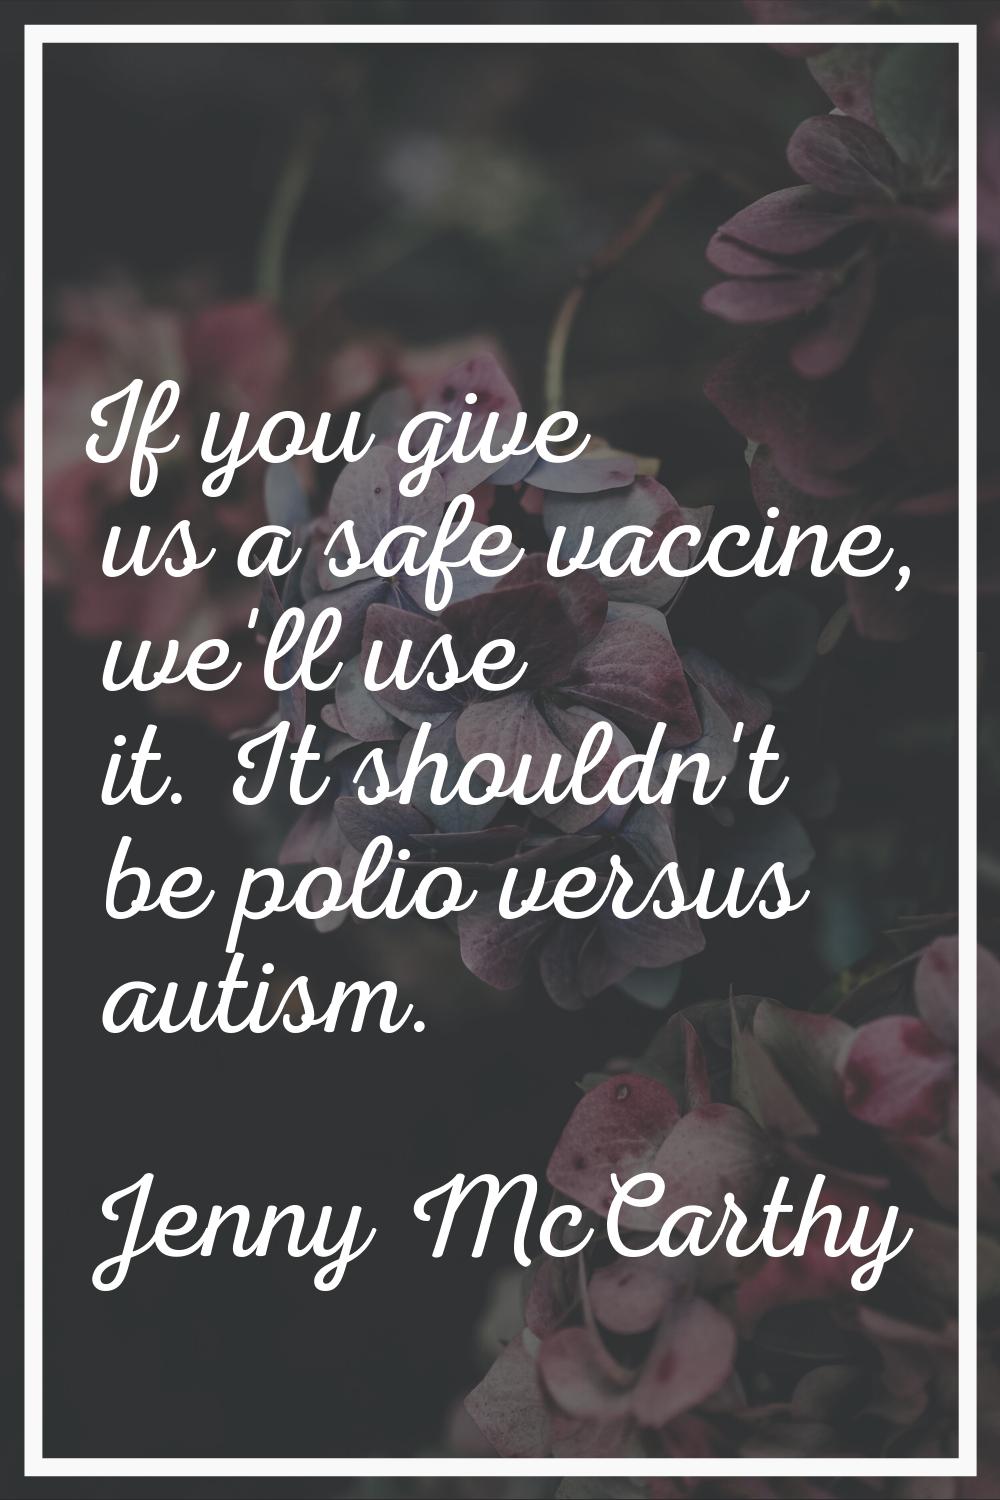 If you give us a safe vaccine, we'll use it. It shouldn't be polio versus autism.